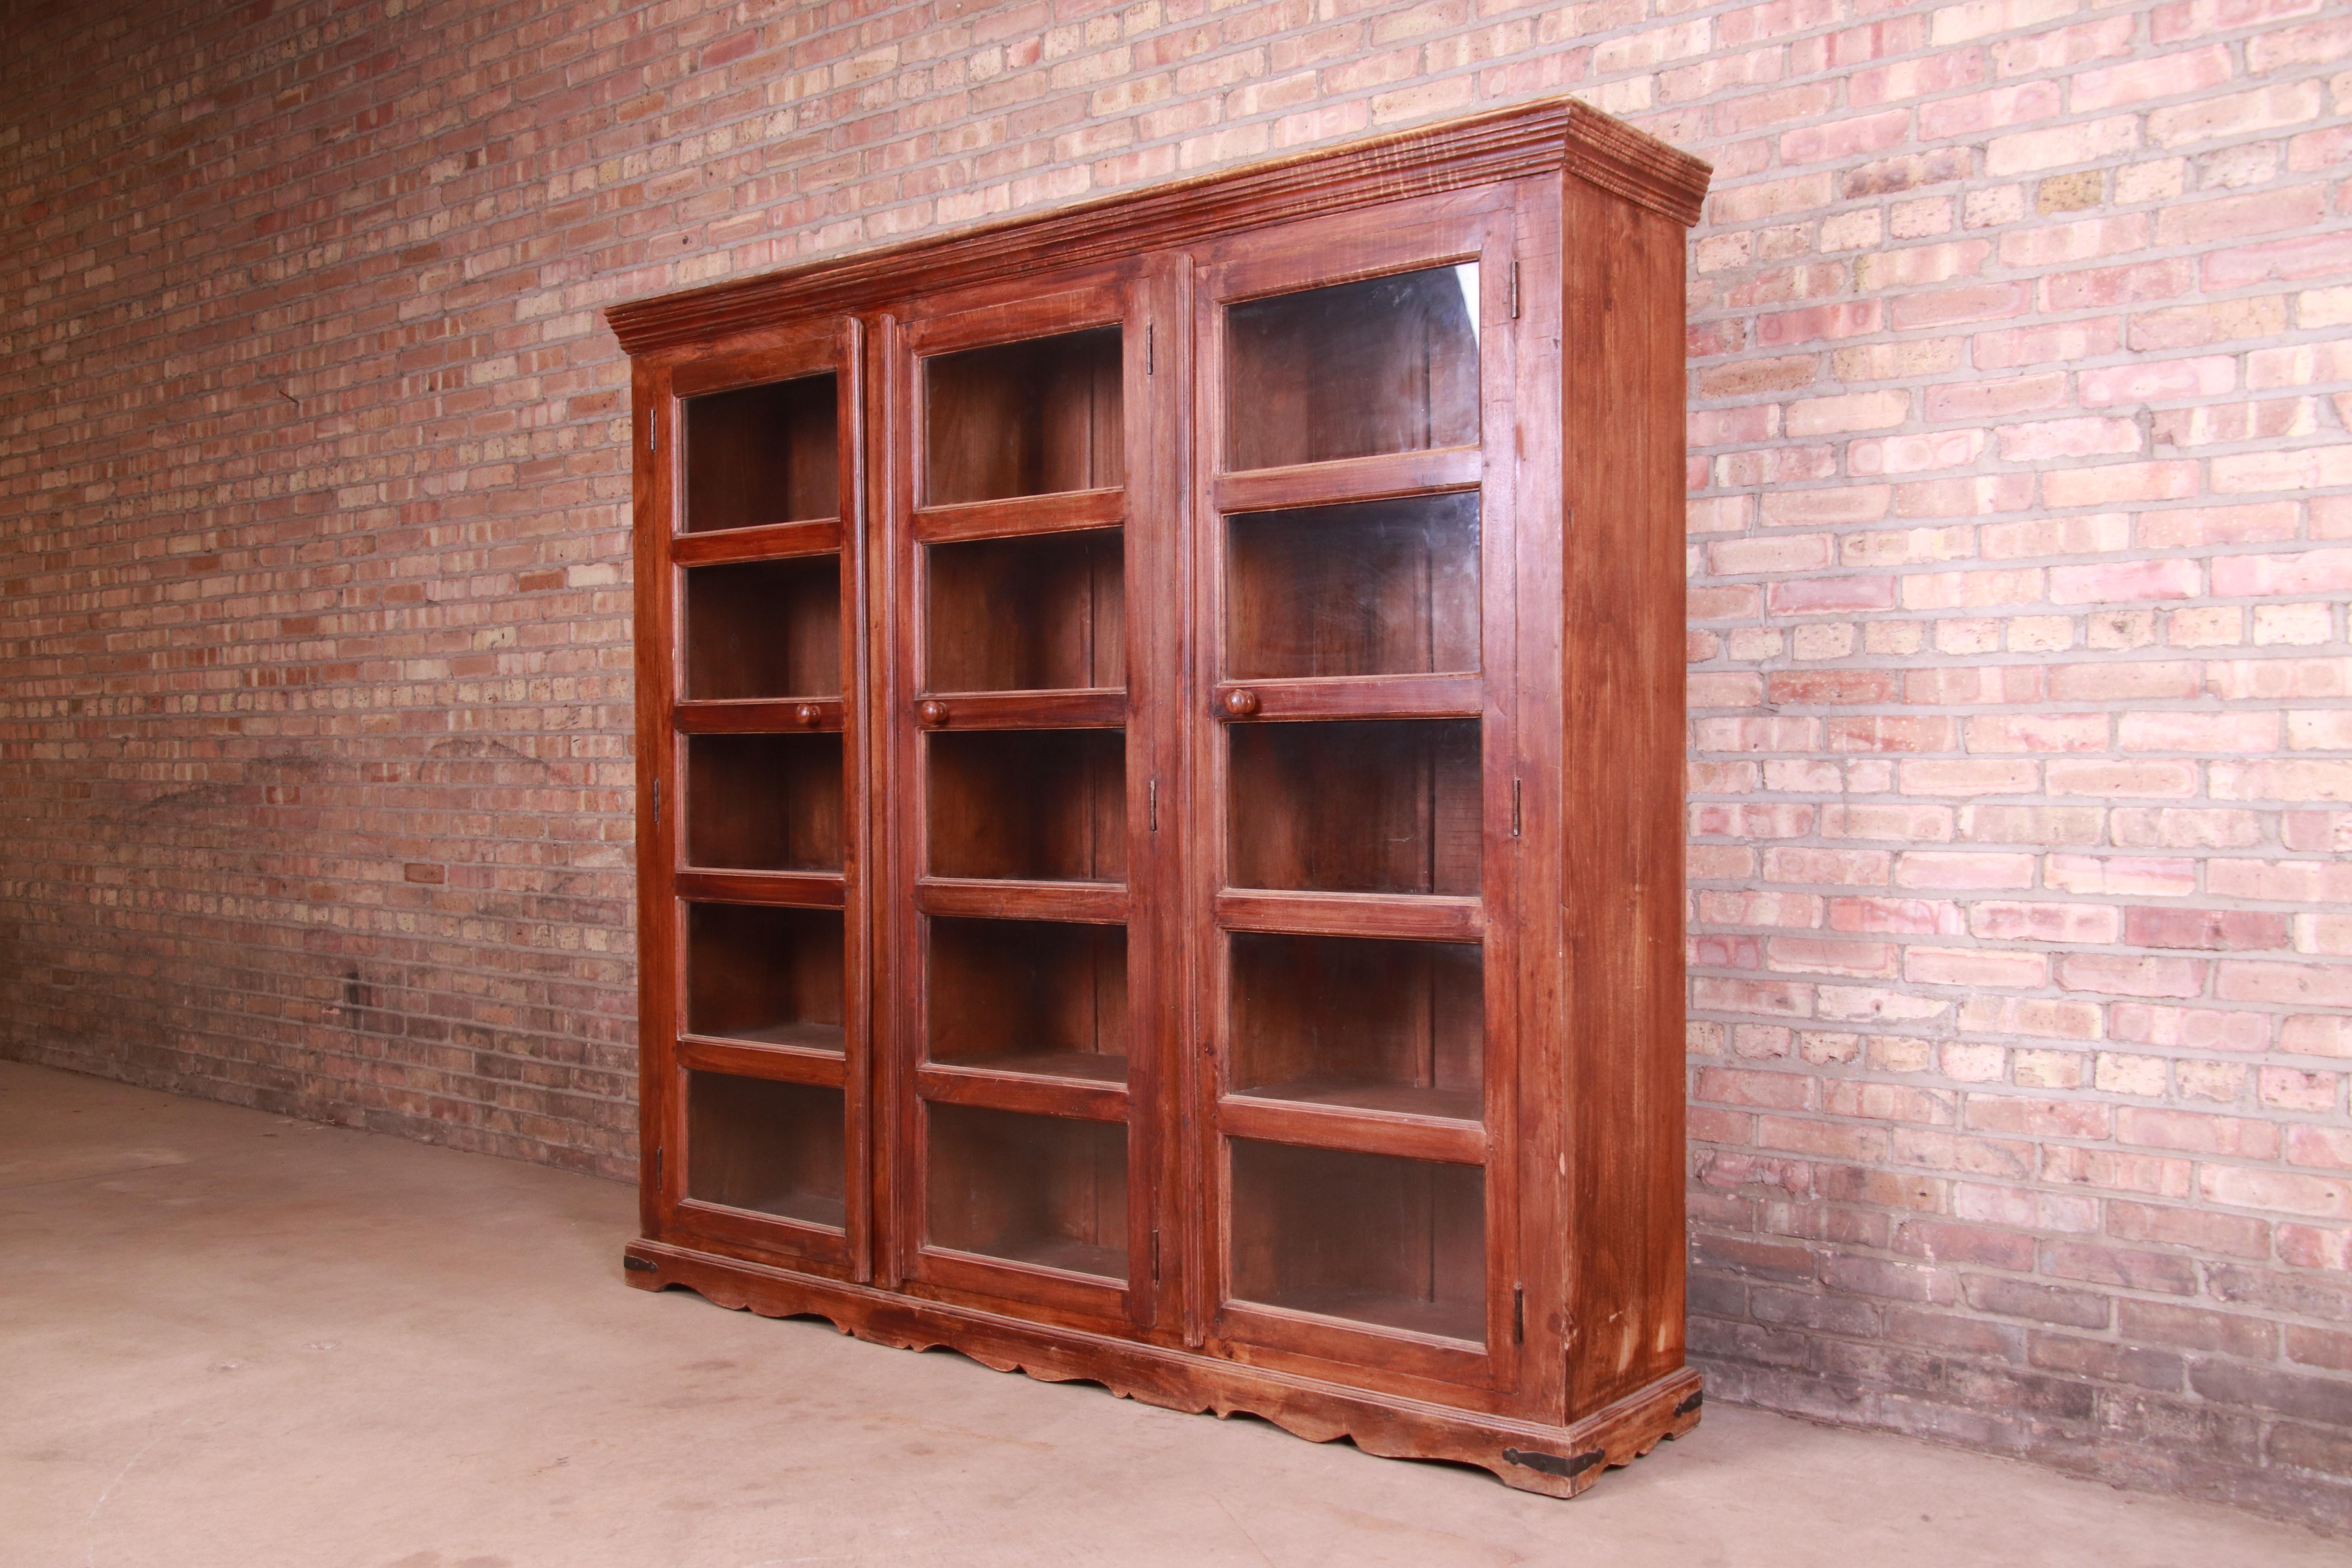 A gorgeous antique rustic style triple bookcase

Circa 1900

Carved walnut, with glass front doors.

Measures: 81.5